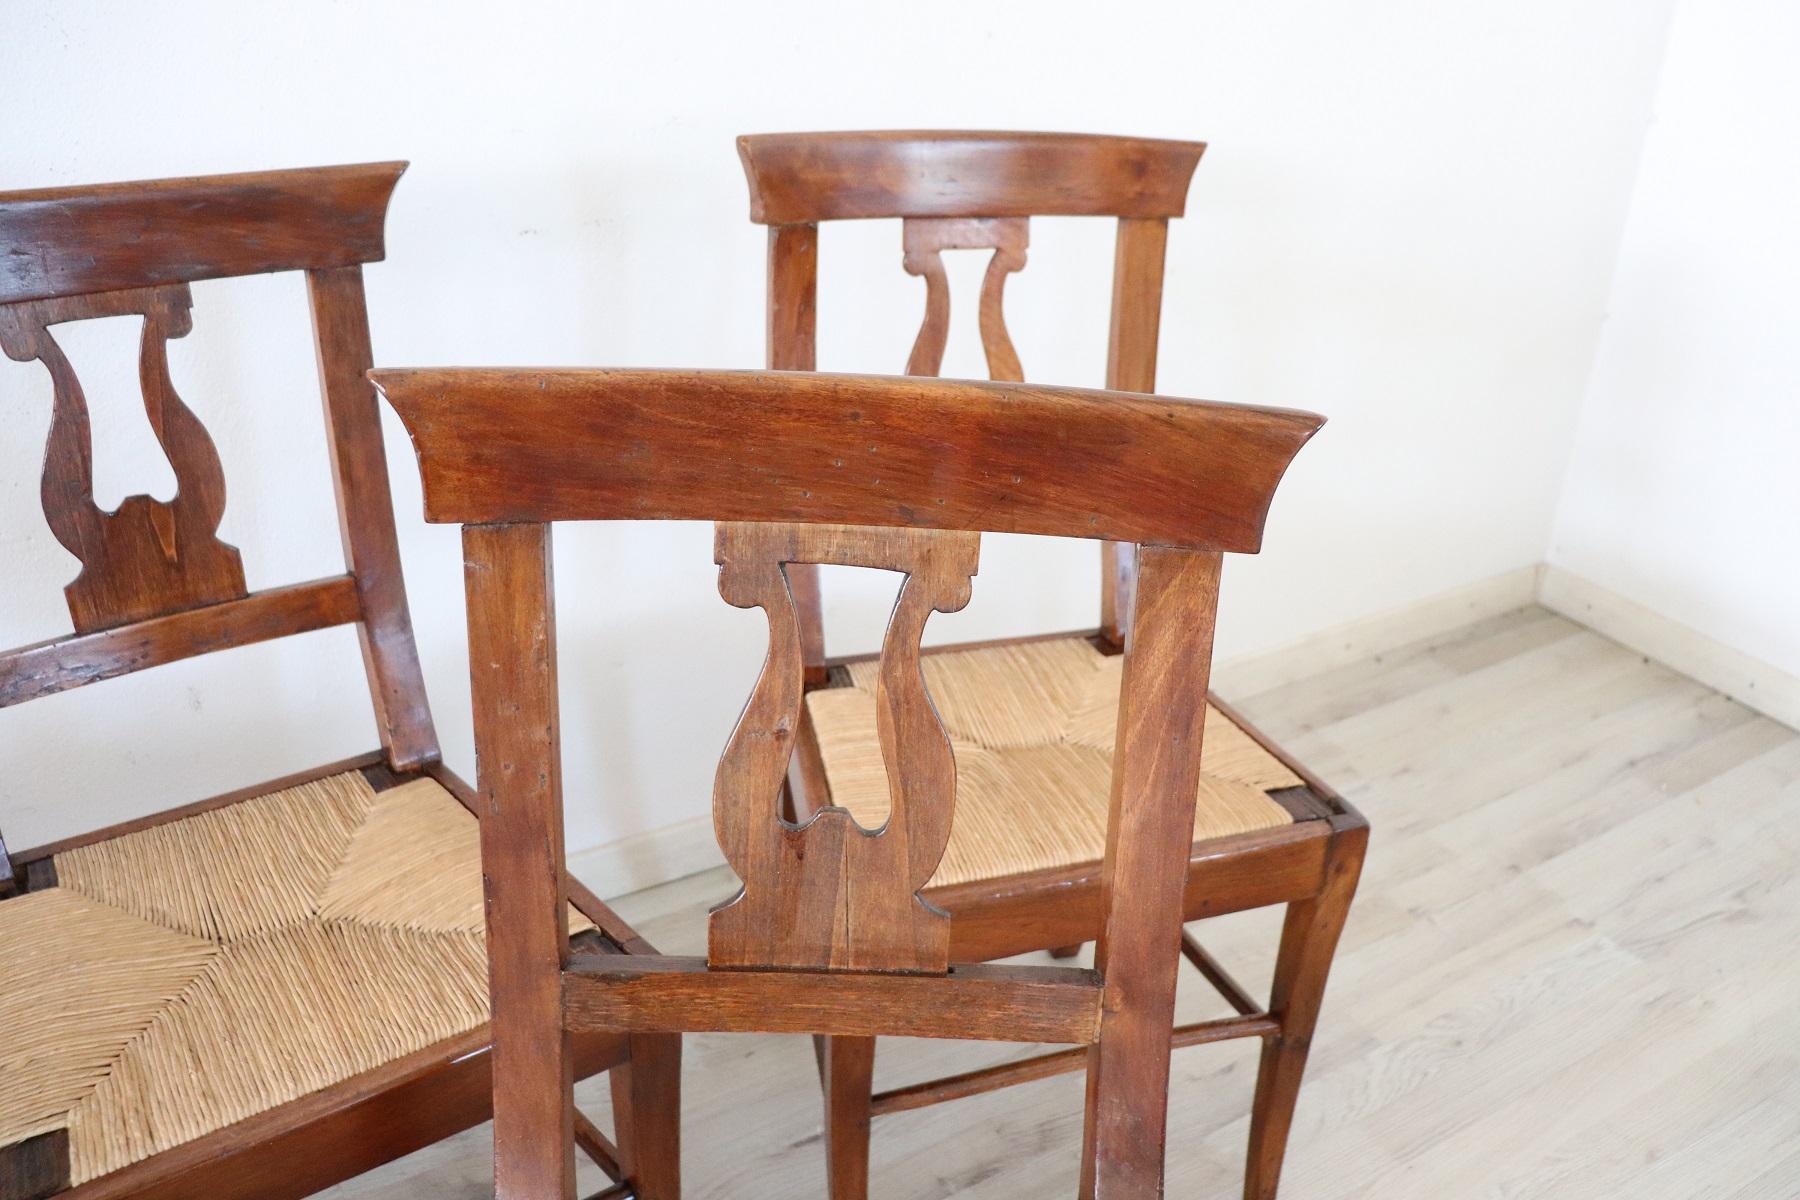 Series of four refined early 19th century authentic Italian Empire walnut wood four chairs. Refined decoration the back is carved in the shape of a lyre. The legs are very elegant straight. The seat is wide and comfortable rustic in handwoven straw